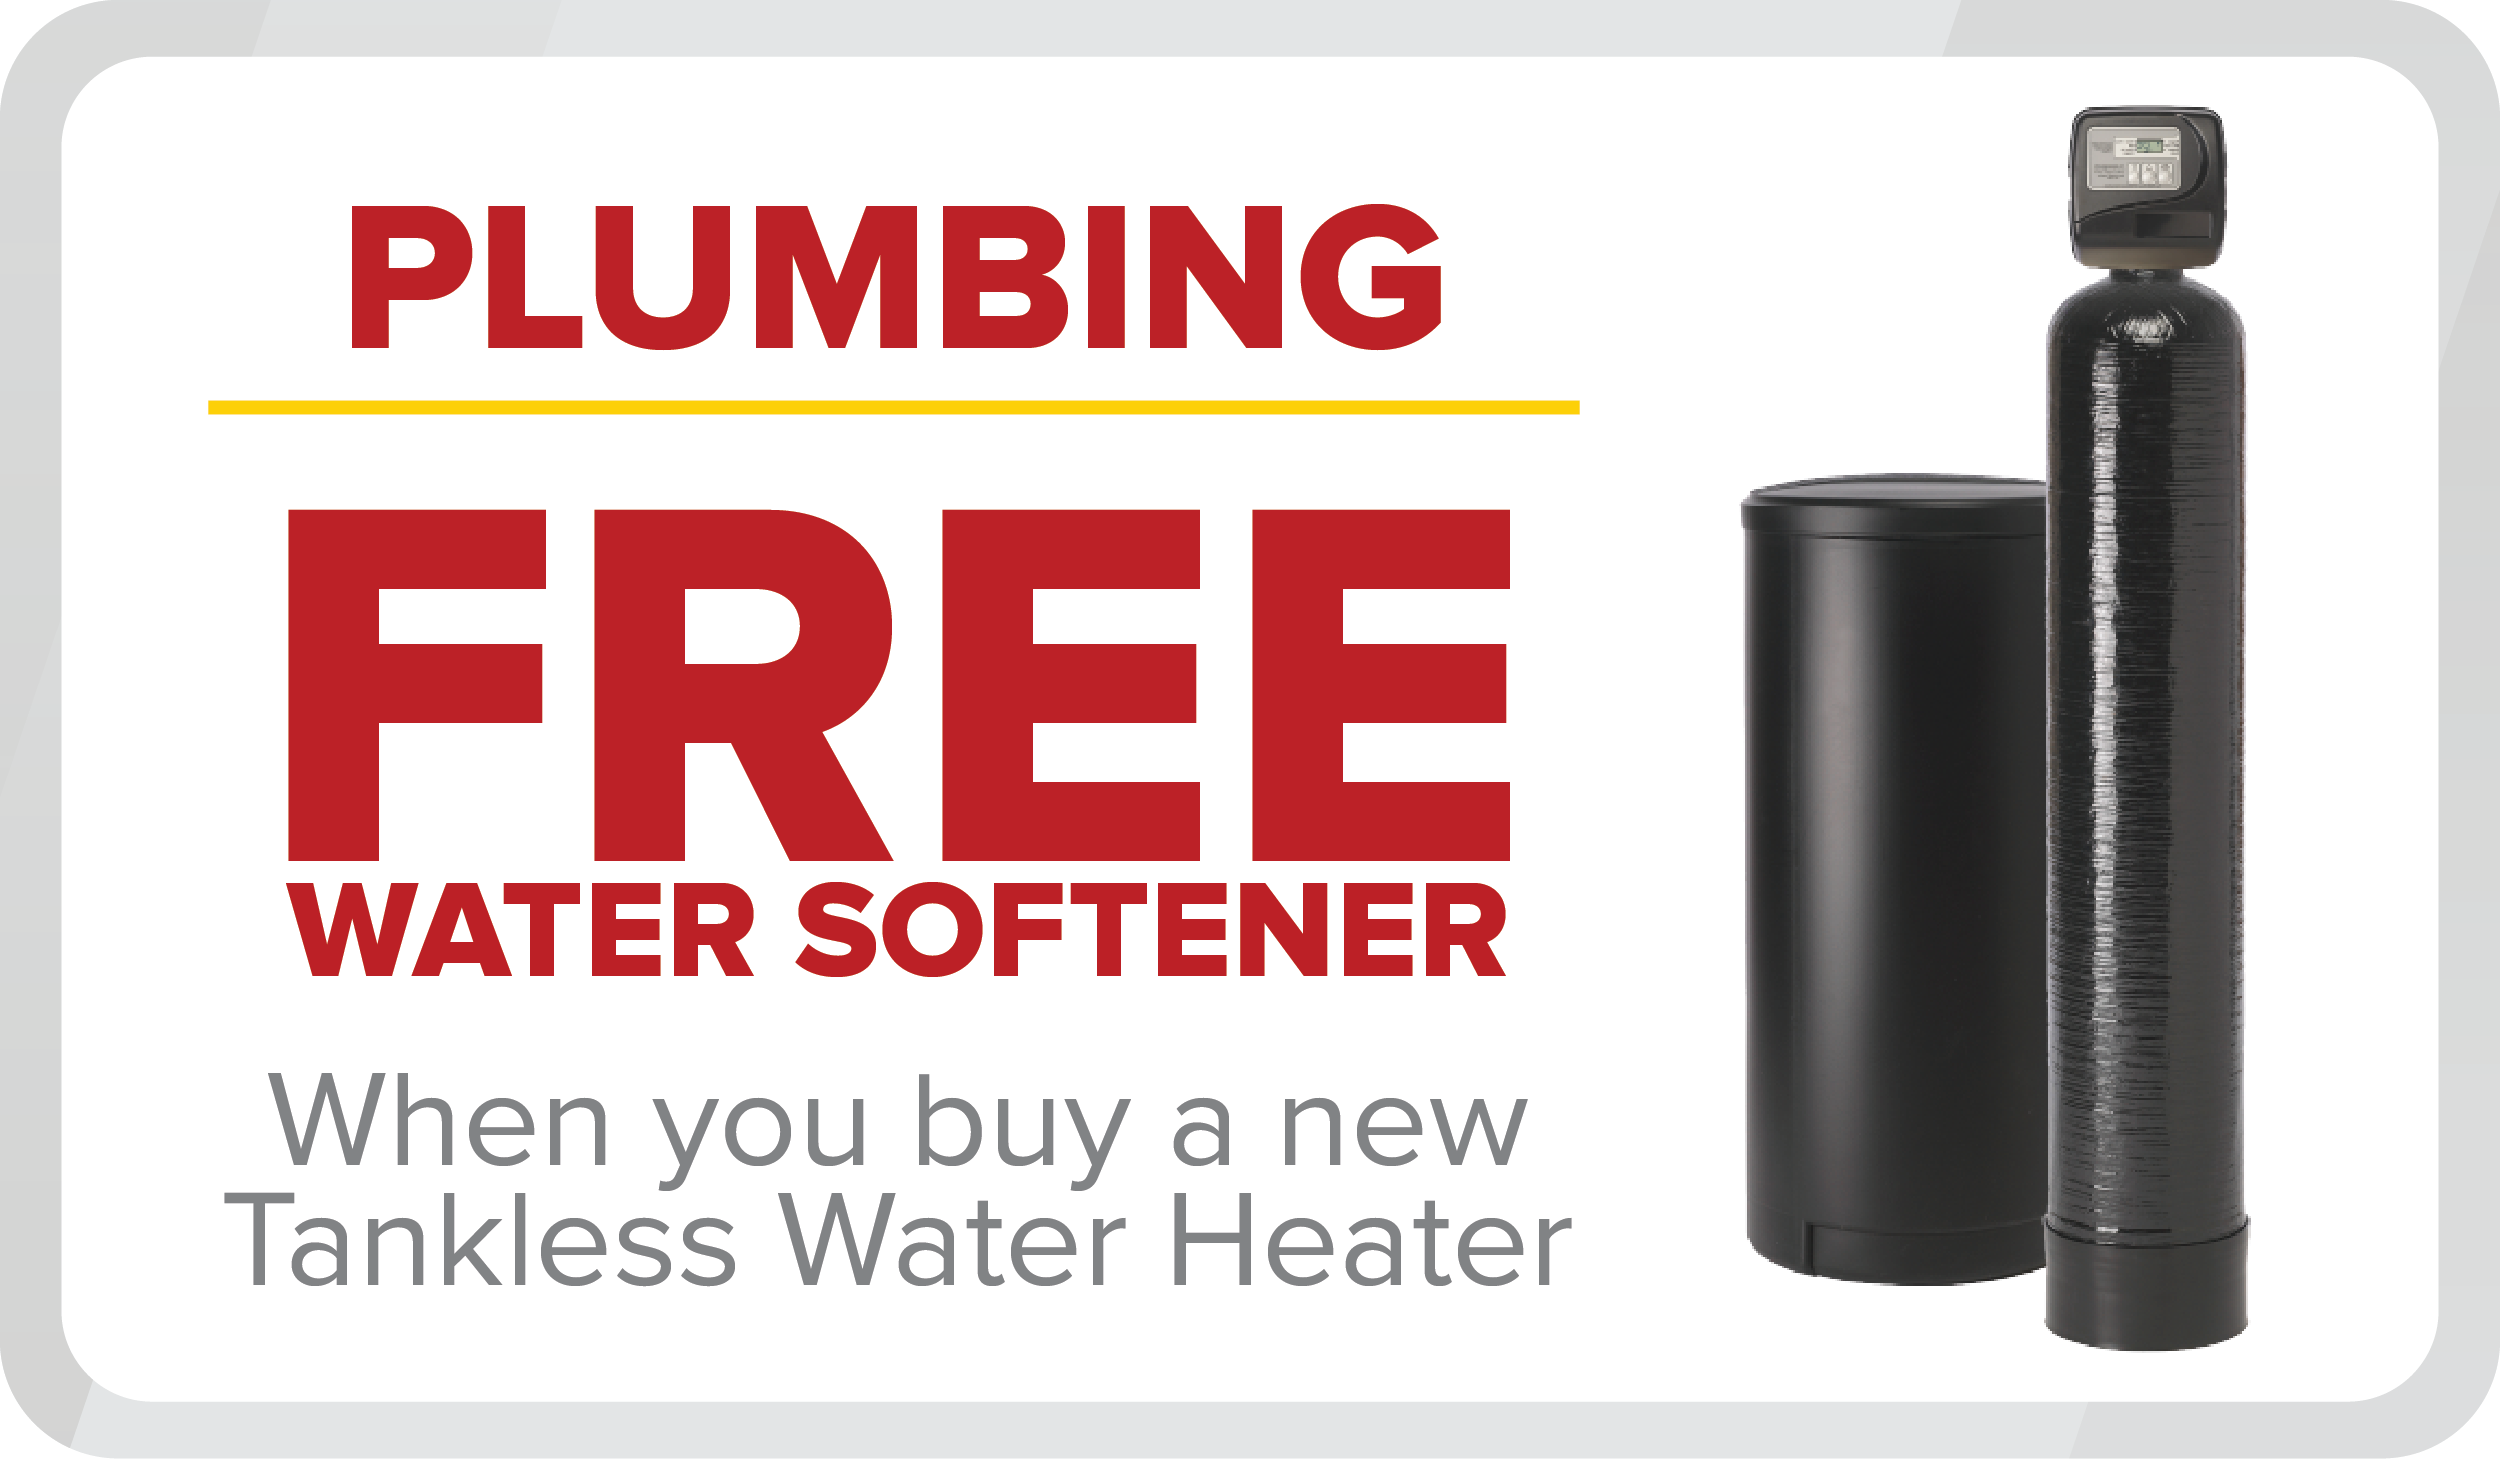 Free Water Softener with the purchase of a New Tankless Water Heater